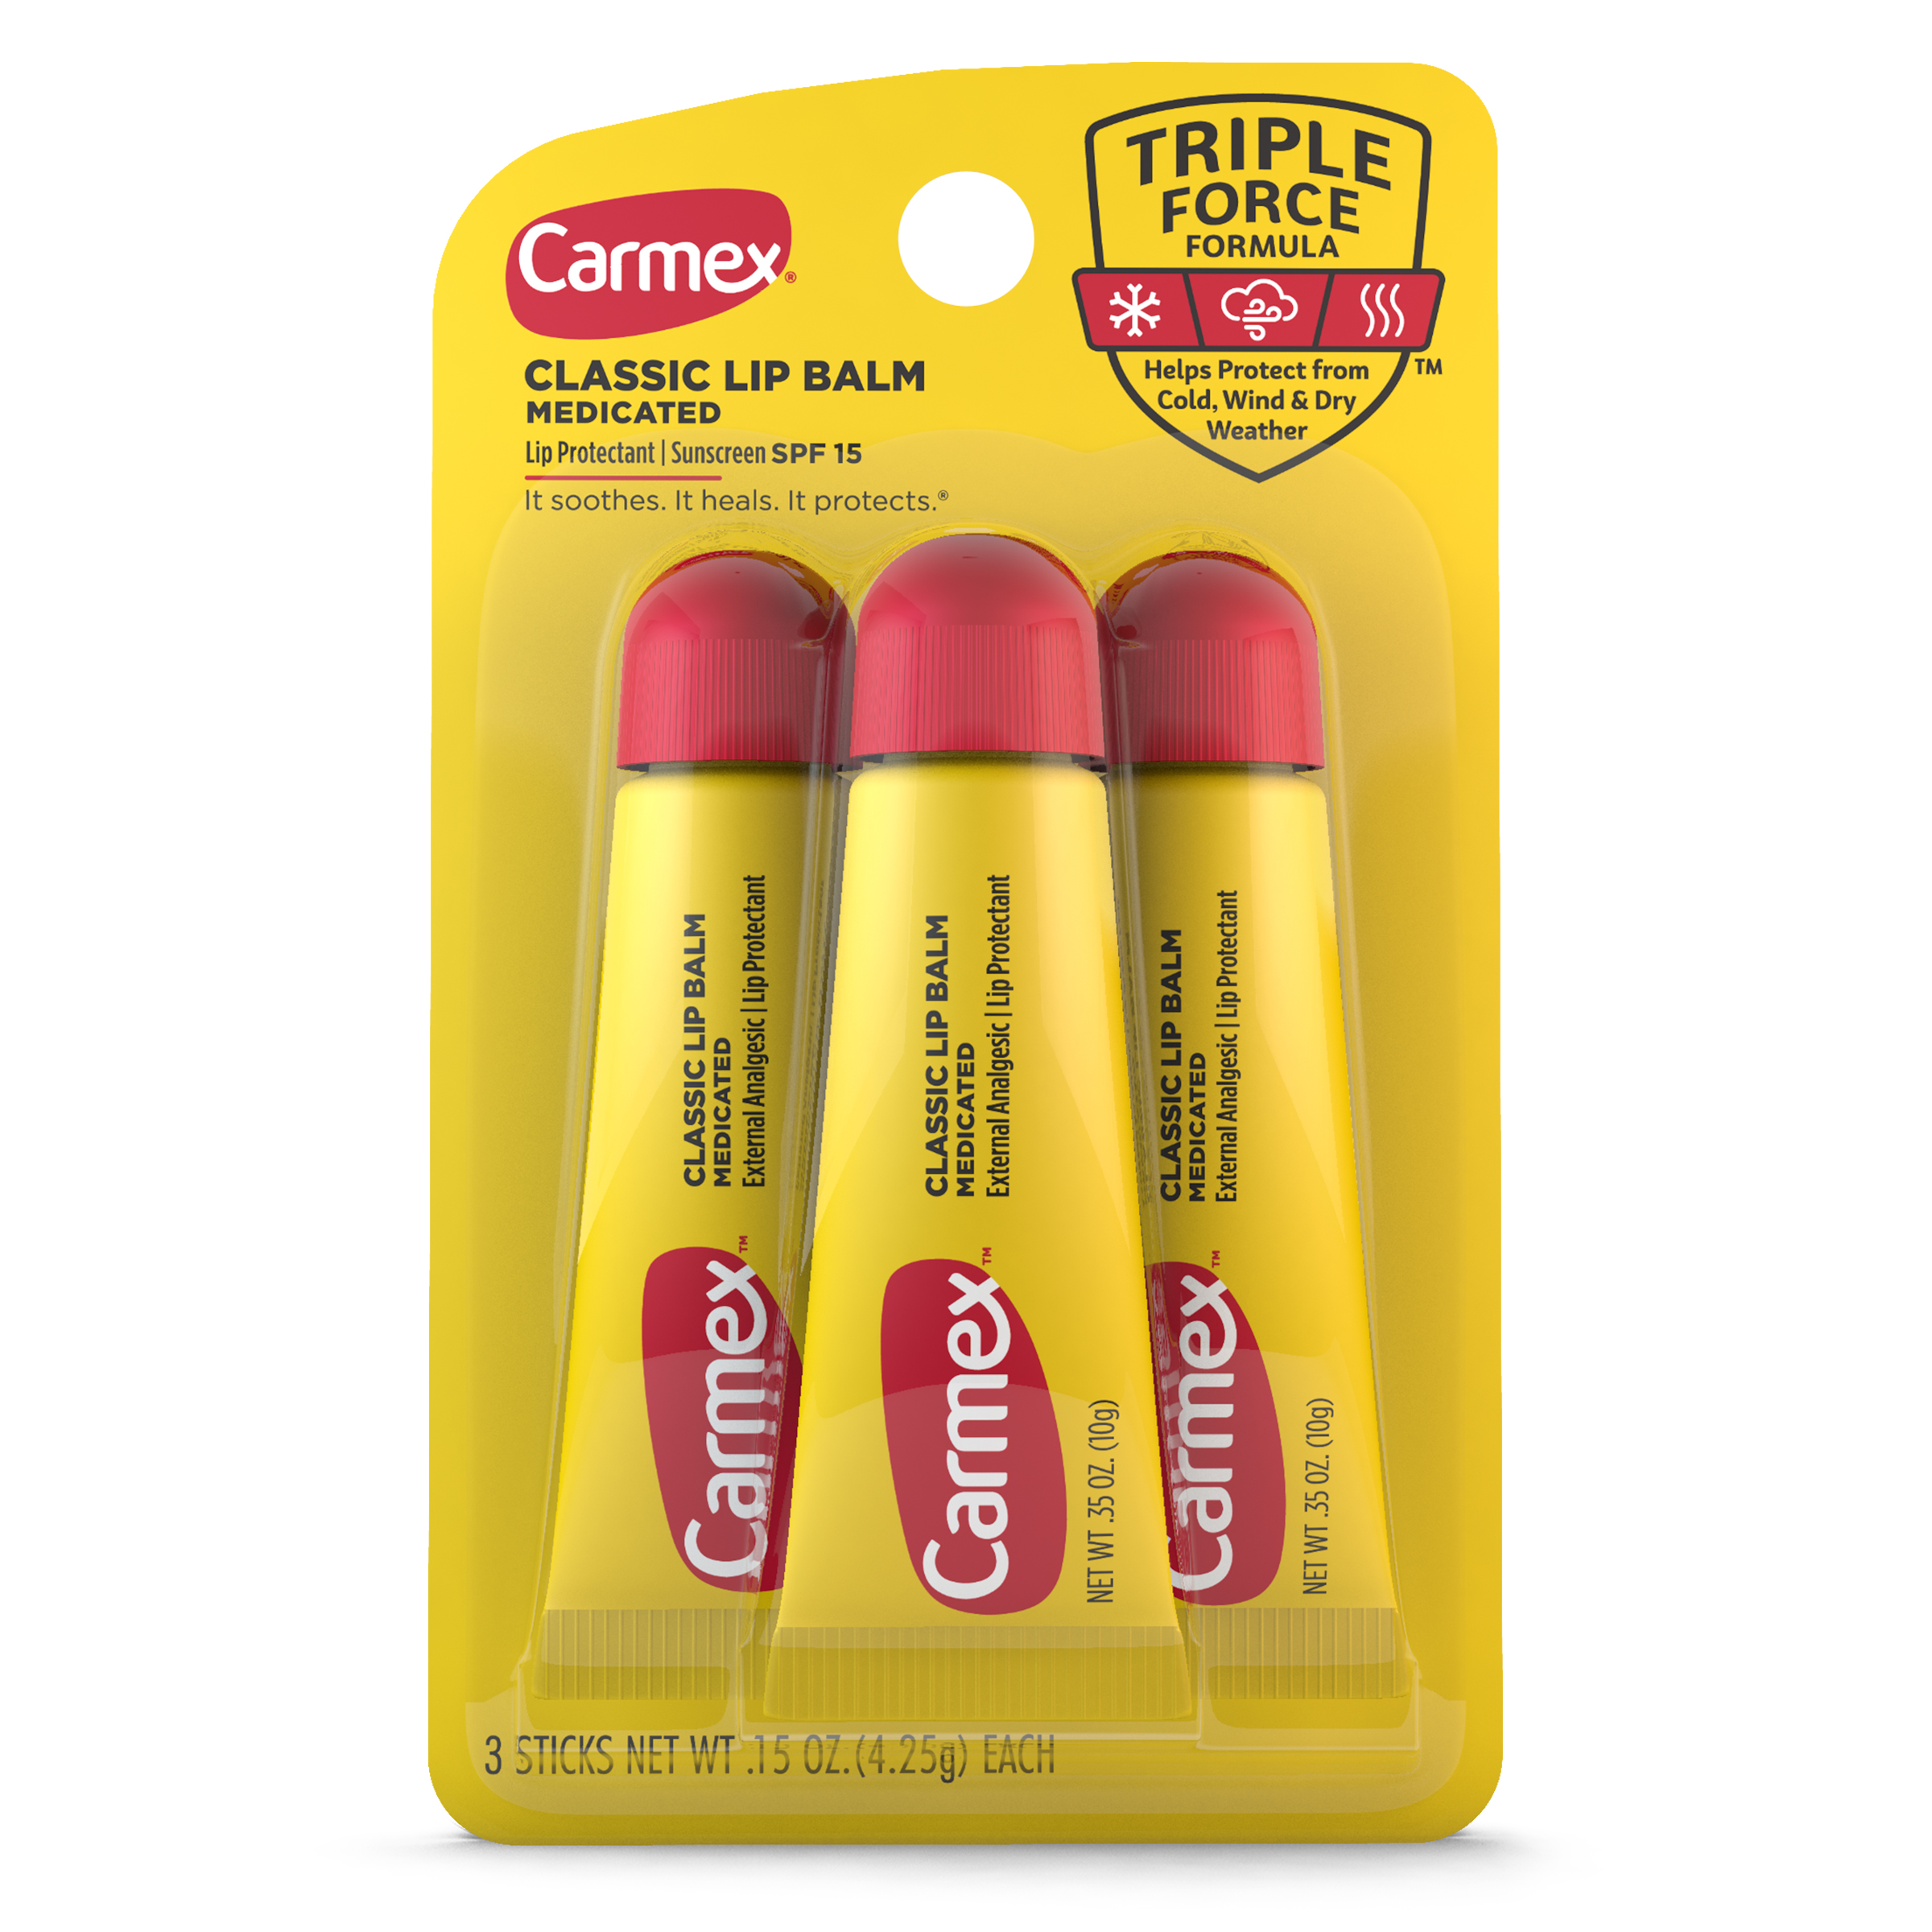 Carmex Classic Medicated Lip Balm Tubes, Lip Moisturizer, 3 Count (1 Pack of 3) - image 11 of 12